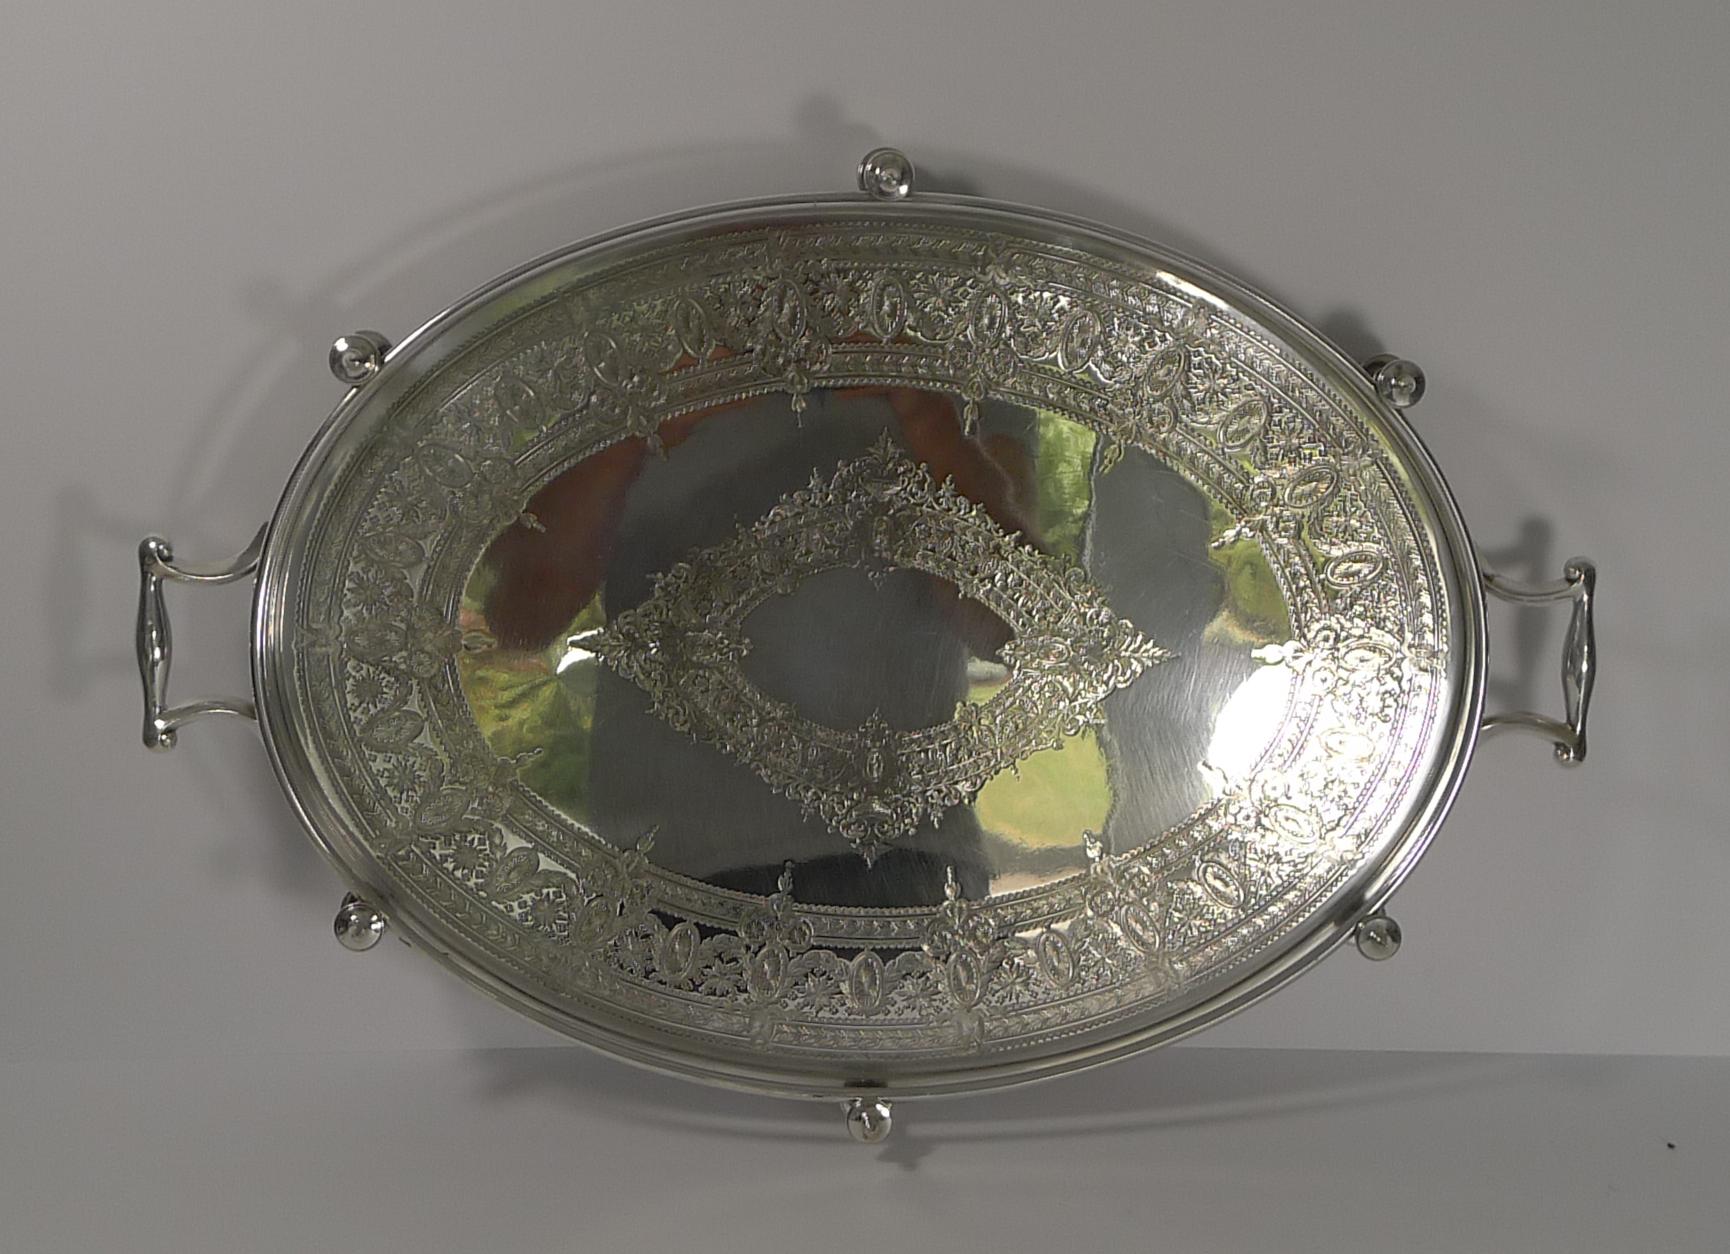 A hefty and very sold tray made from EPNS (Electro-Plated Nickel Silver) by the renowned silversmith, James Dixon and Sons, with full marks on the underside.

The base of this galleried tray is beautifully engraved, highly decorative.

Dating to